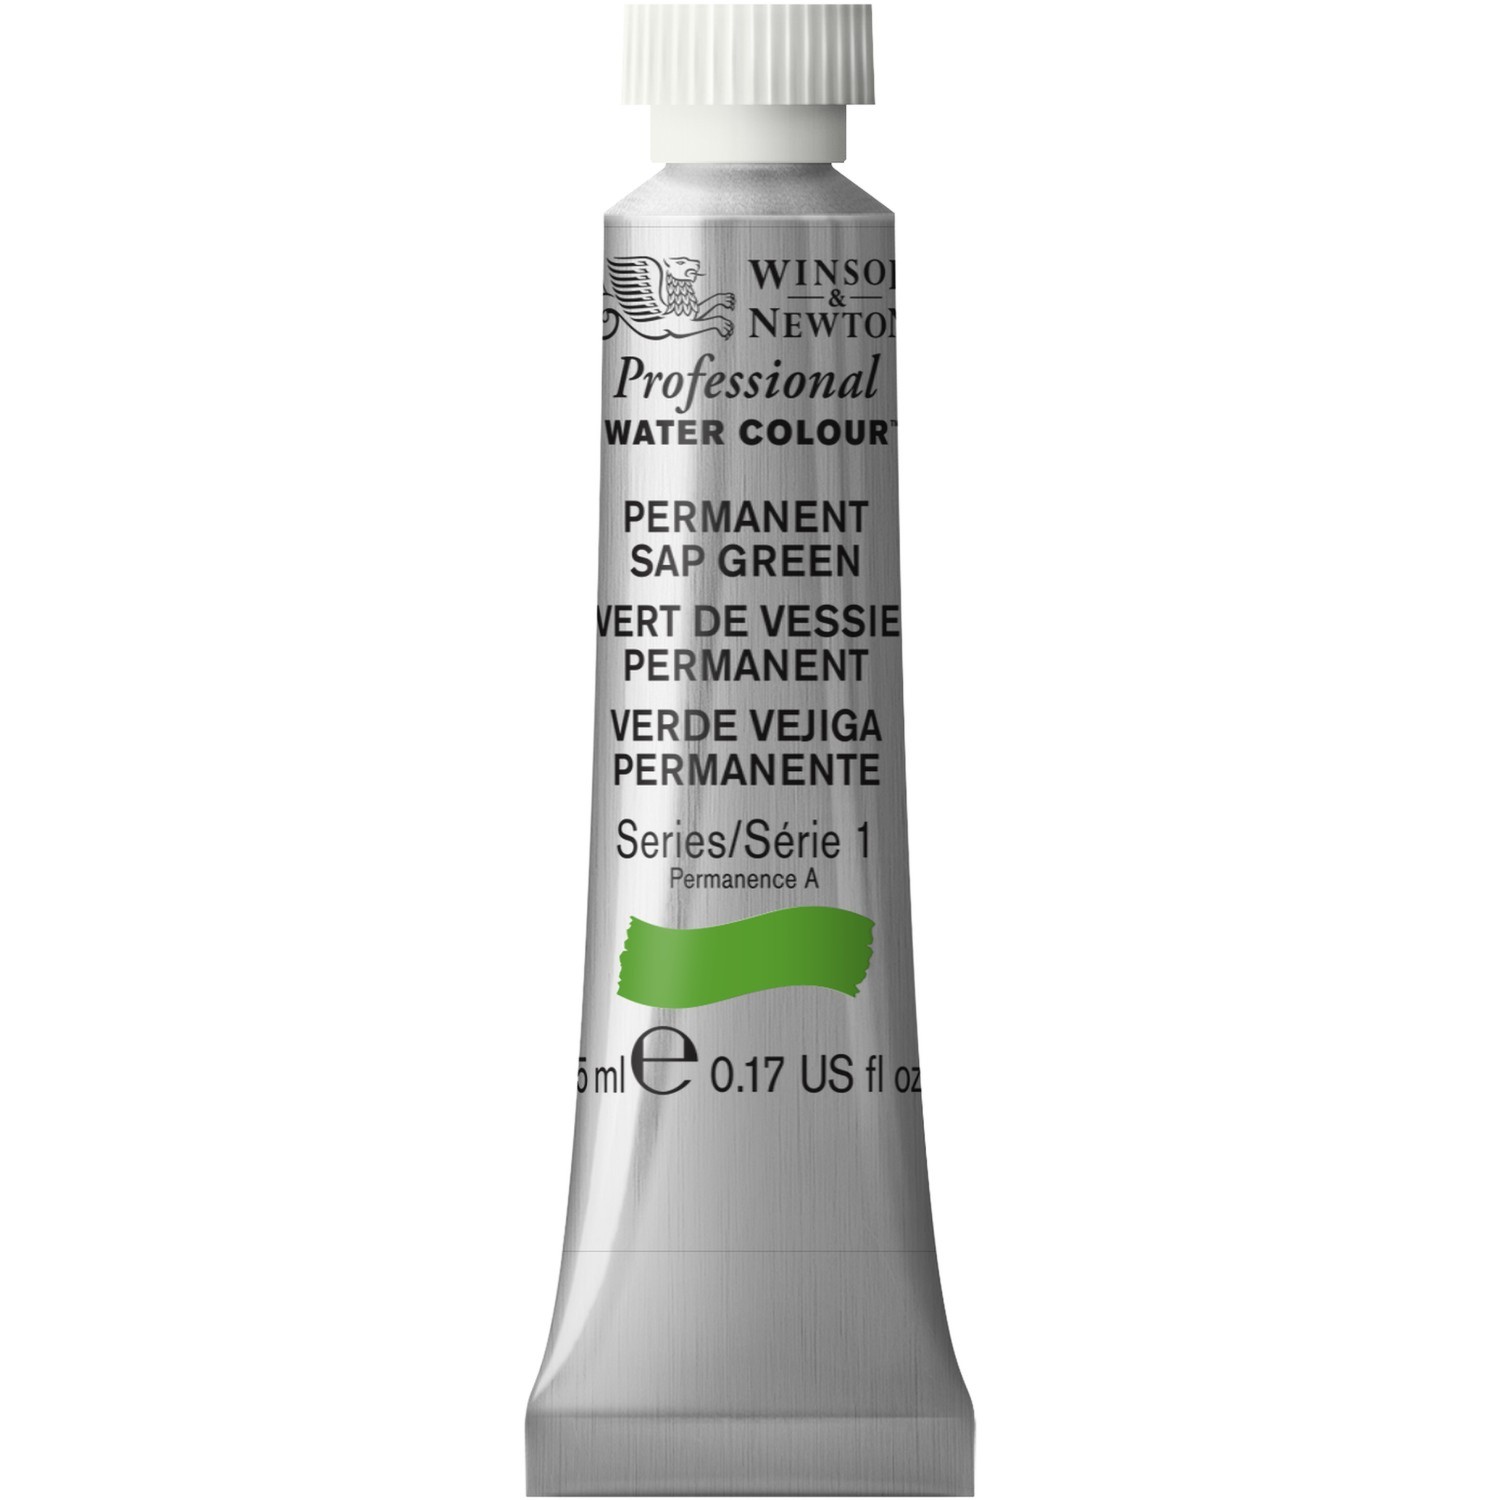 Winsor and Newton 5ml Professional Watercolour Paint - Permanent Sap Green Image 1